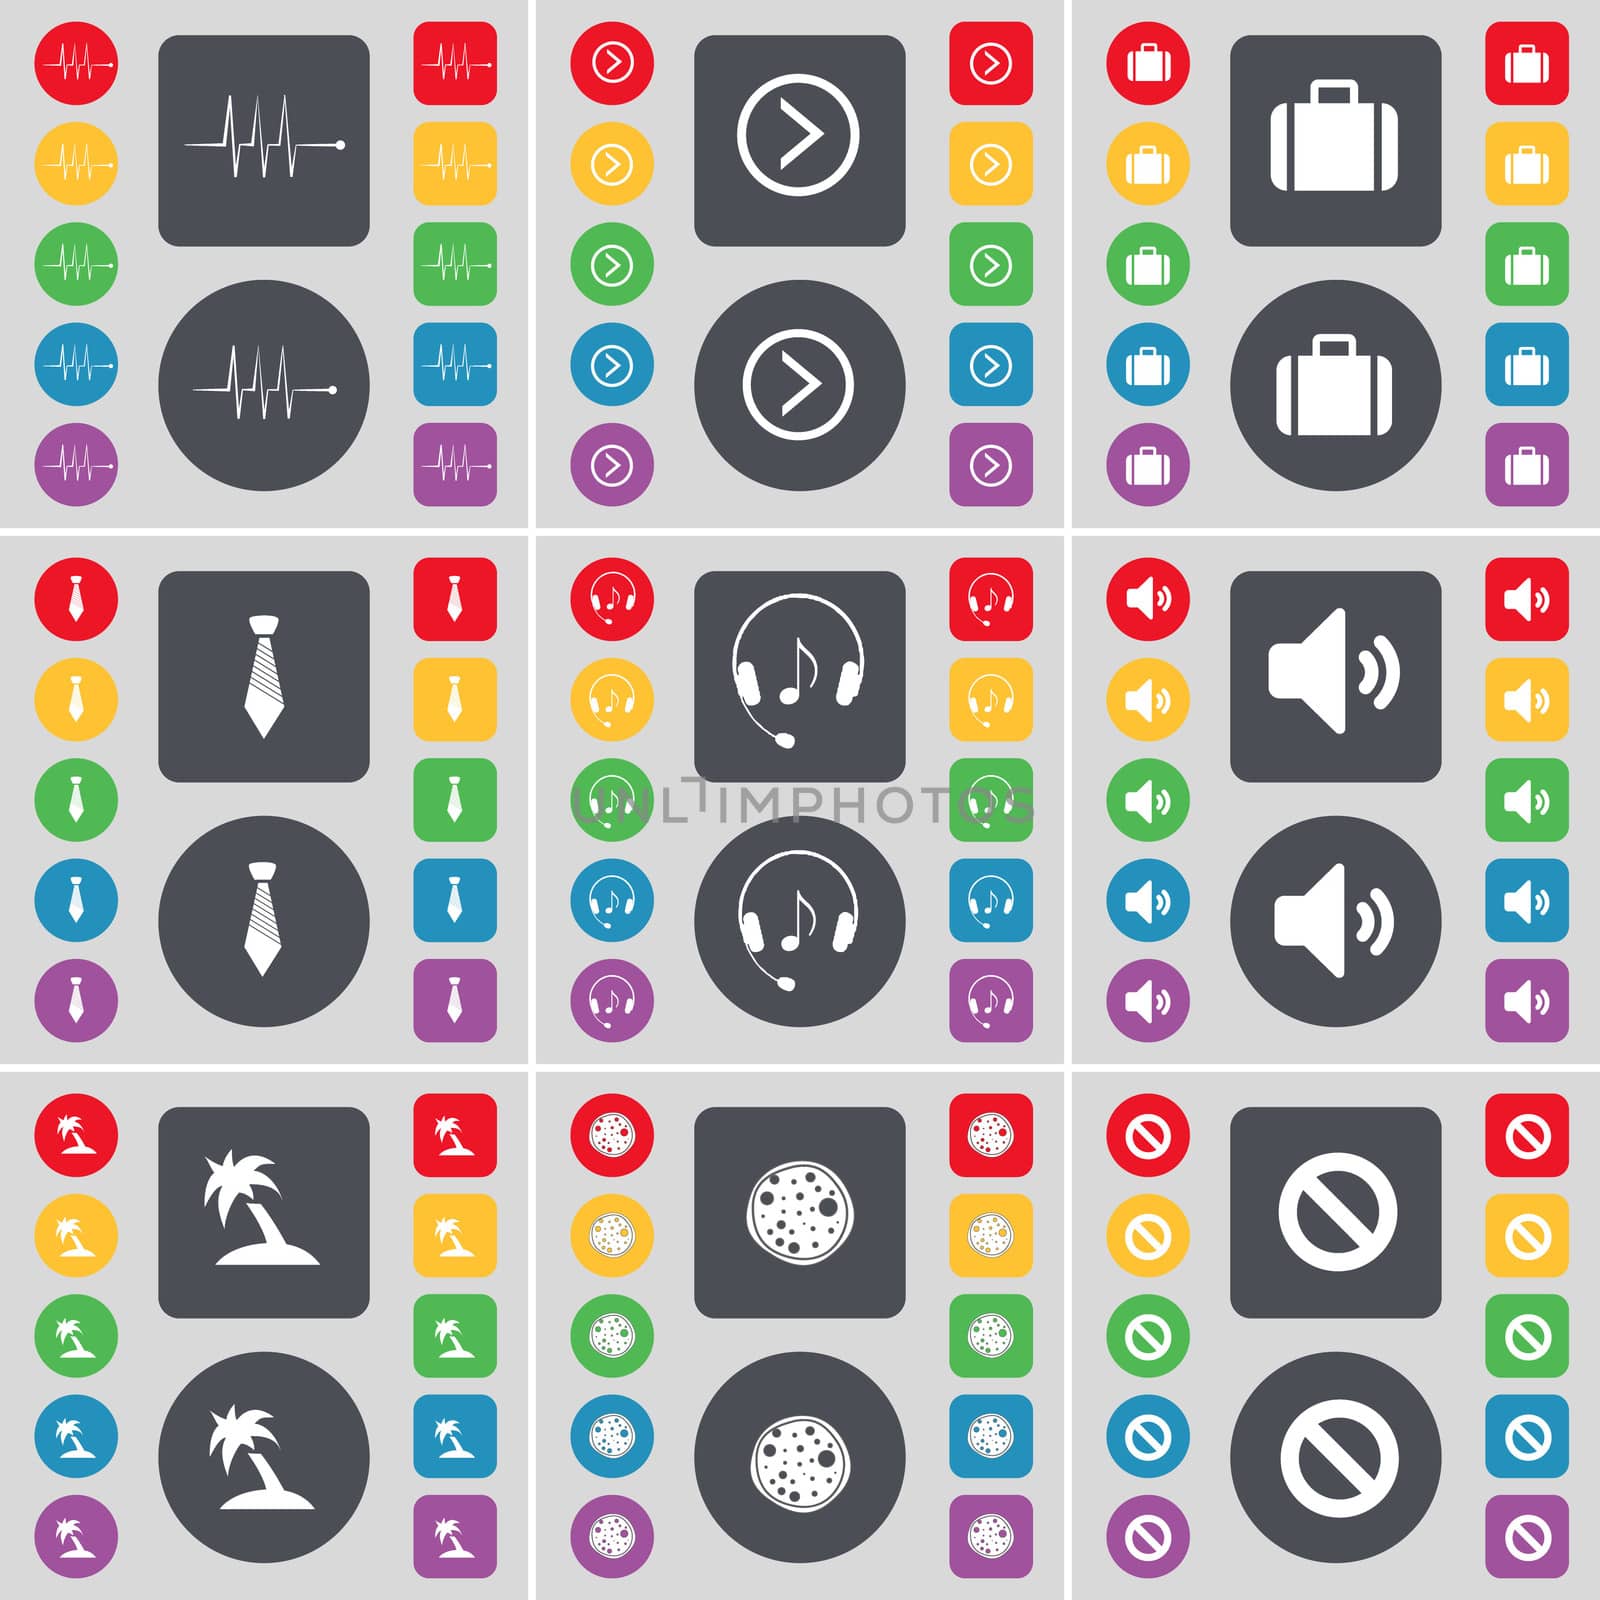 Pulse, Arrow right, Suitcase, Tie, Headphones, Sound, Palm, Pizza, Stop icon symbol. A large set of flat, colored buttons for your design. illustration